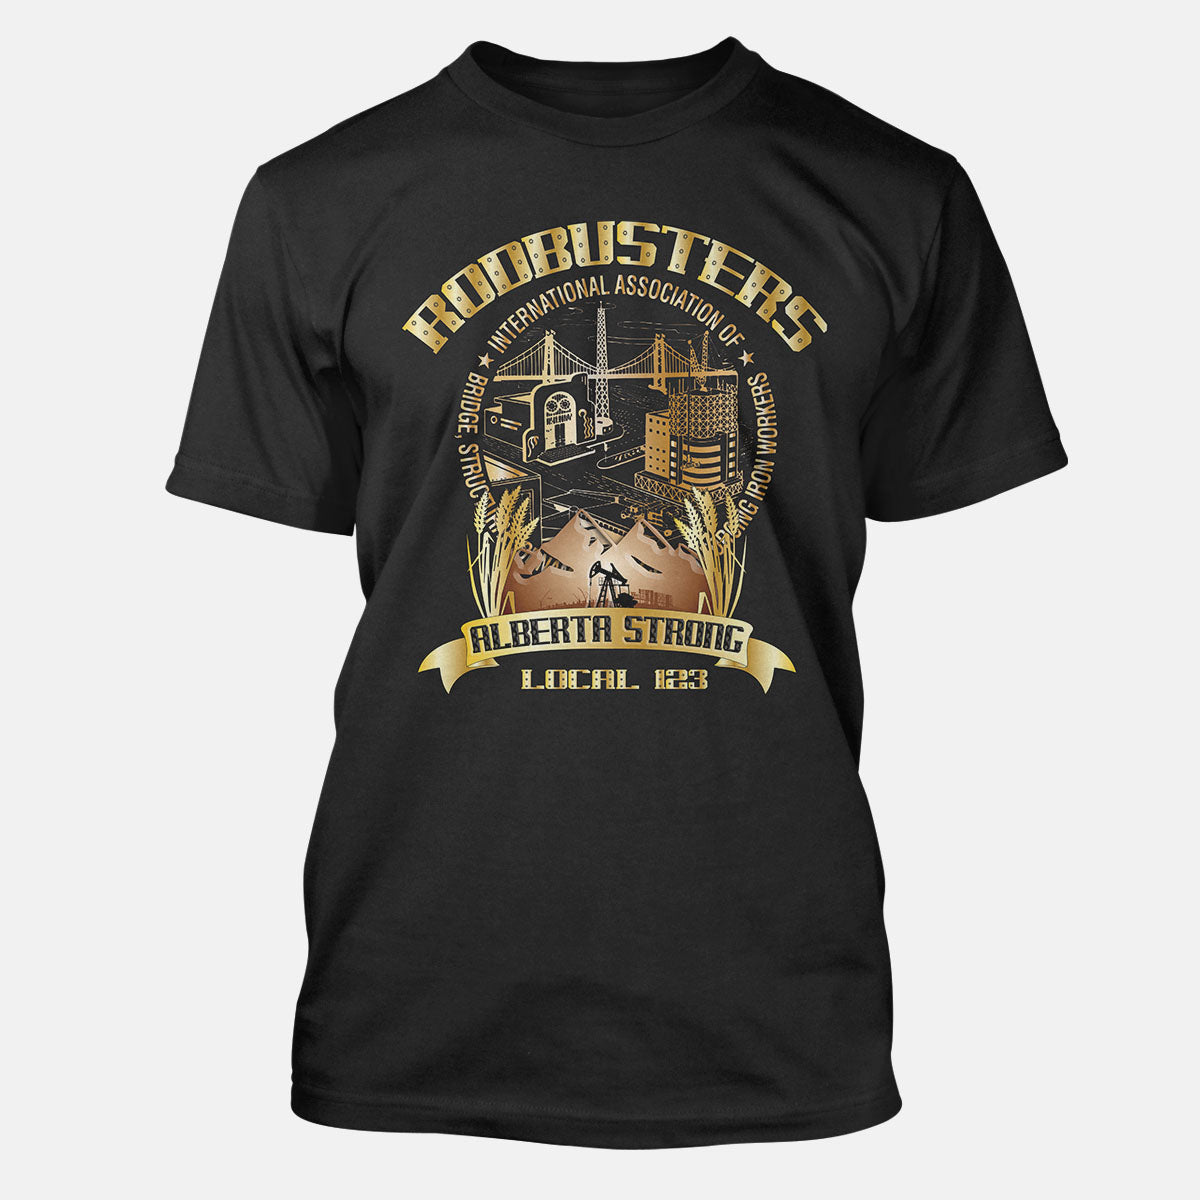 IW Rodbusters Alberta Strong Apparel